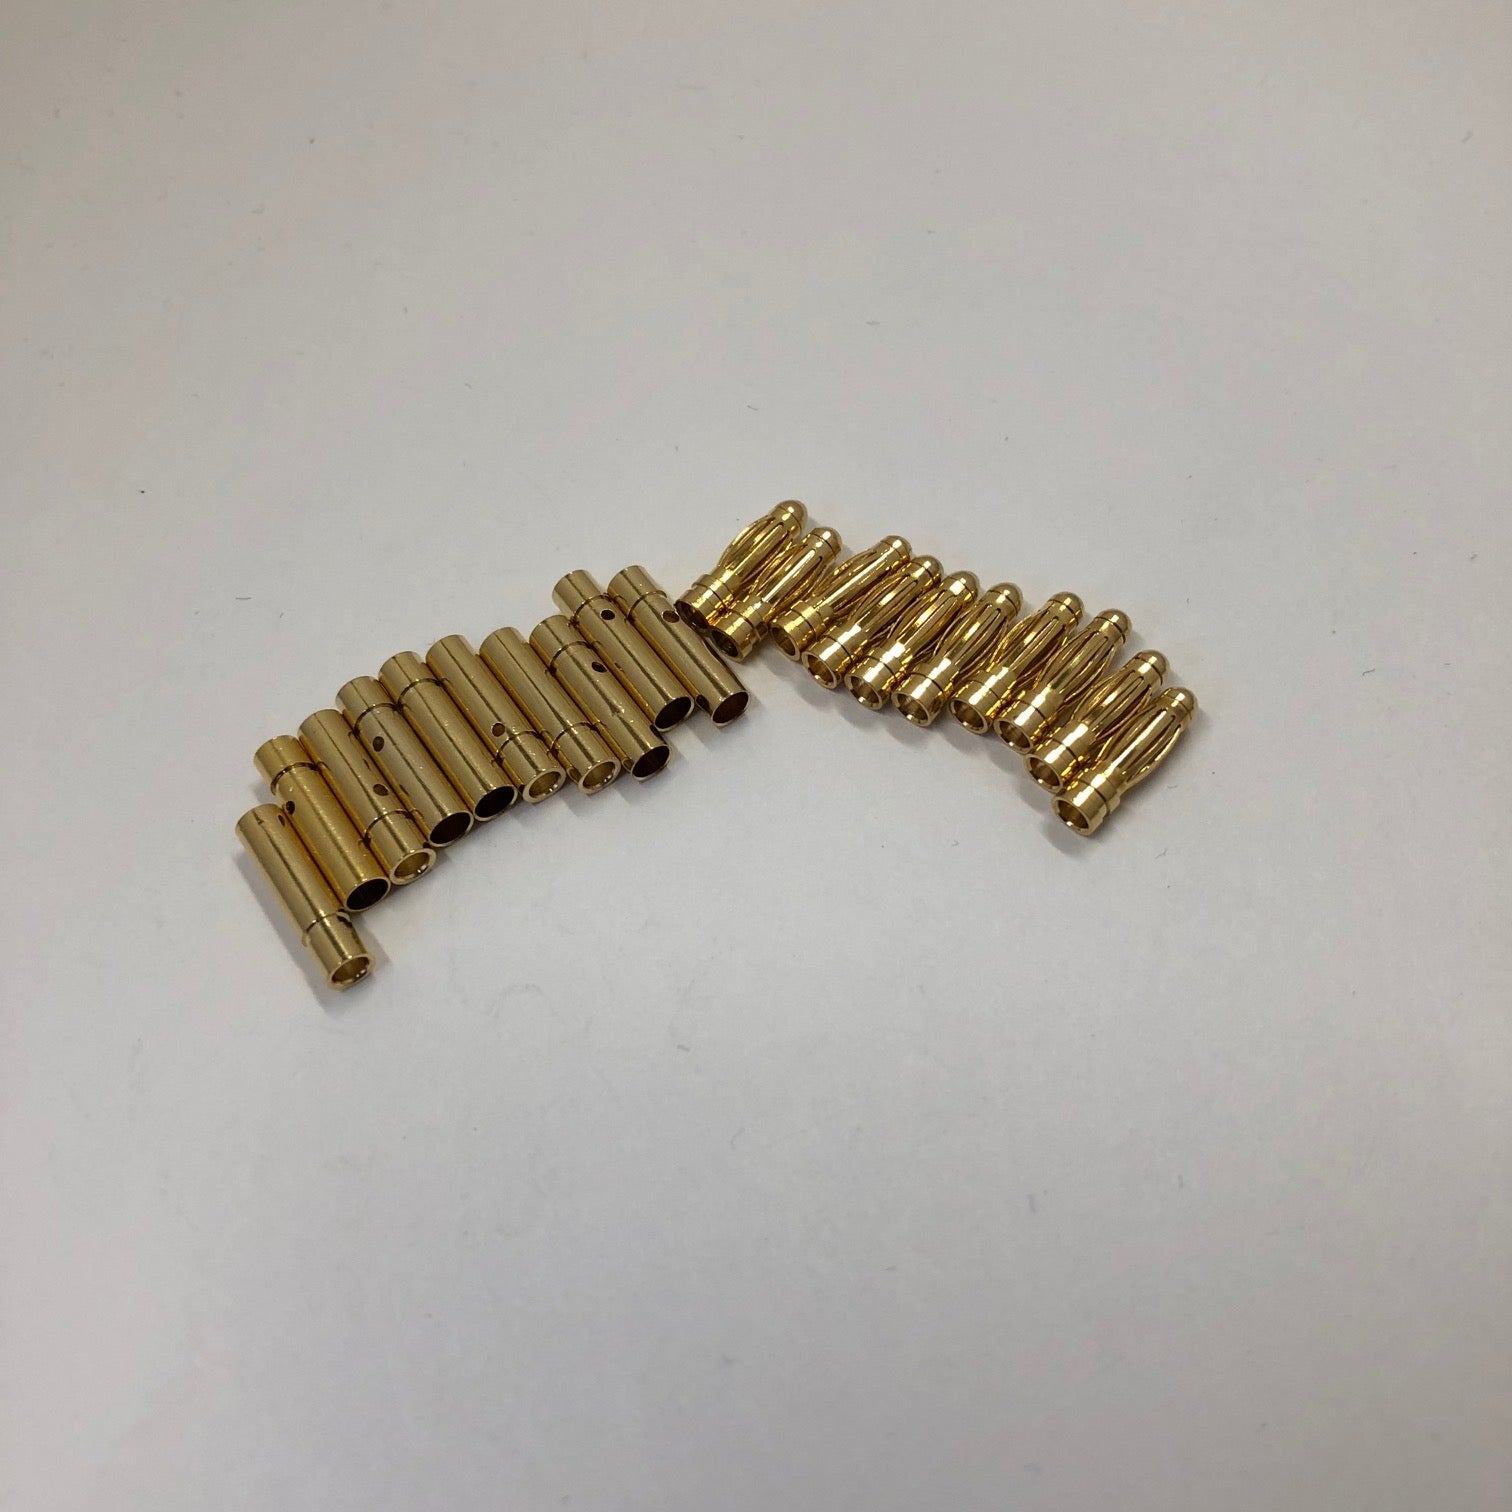 3mm Gold Bullet Connector Set - 10 Pairs